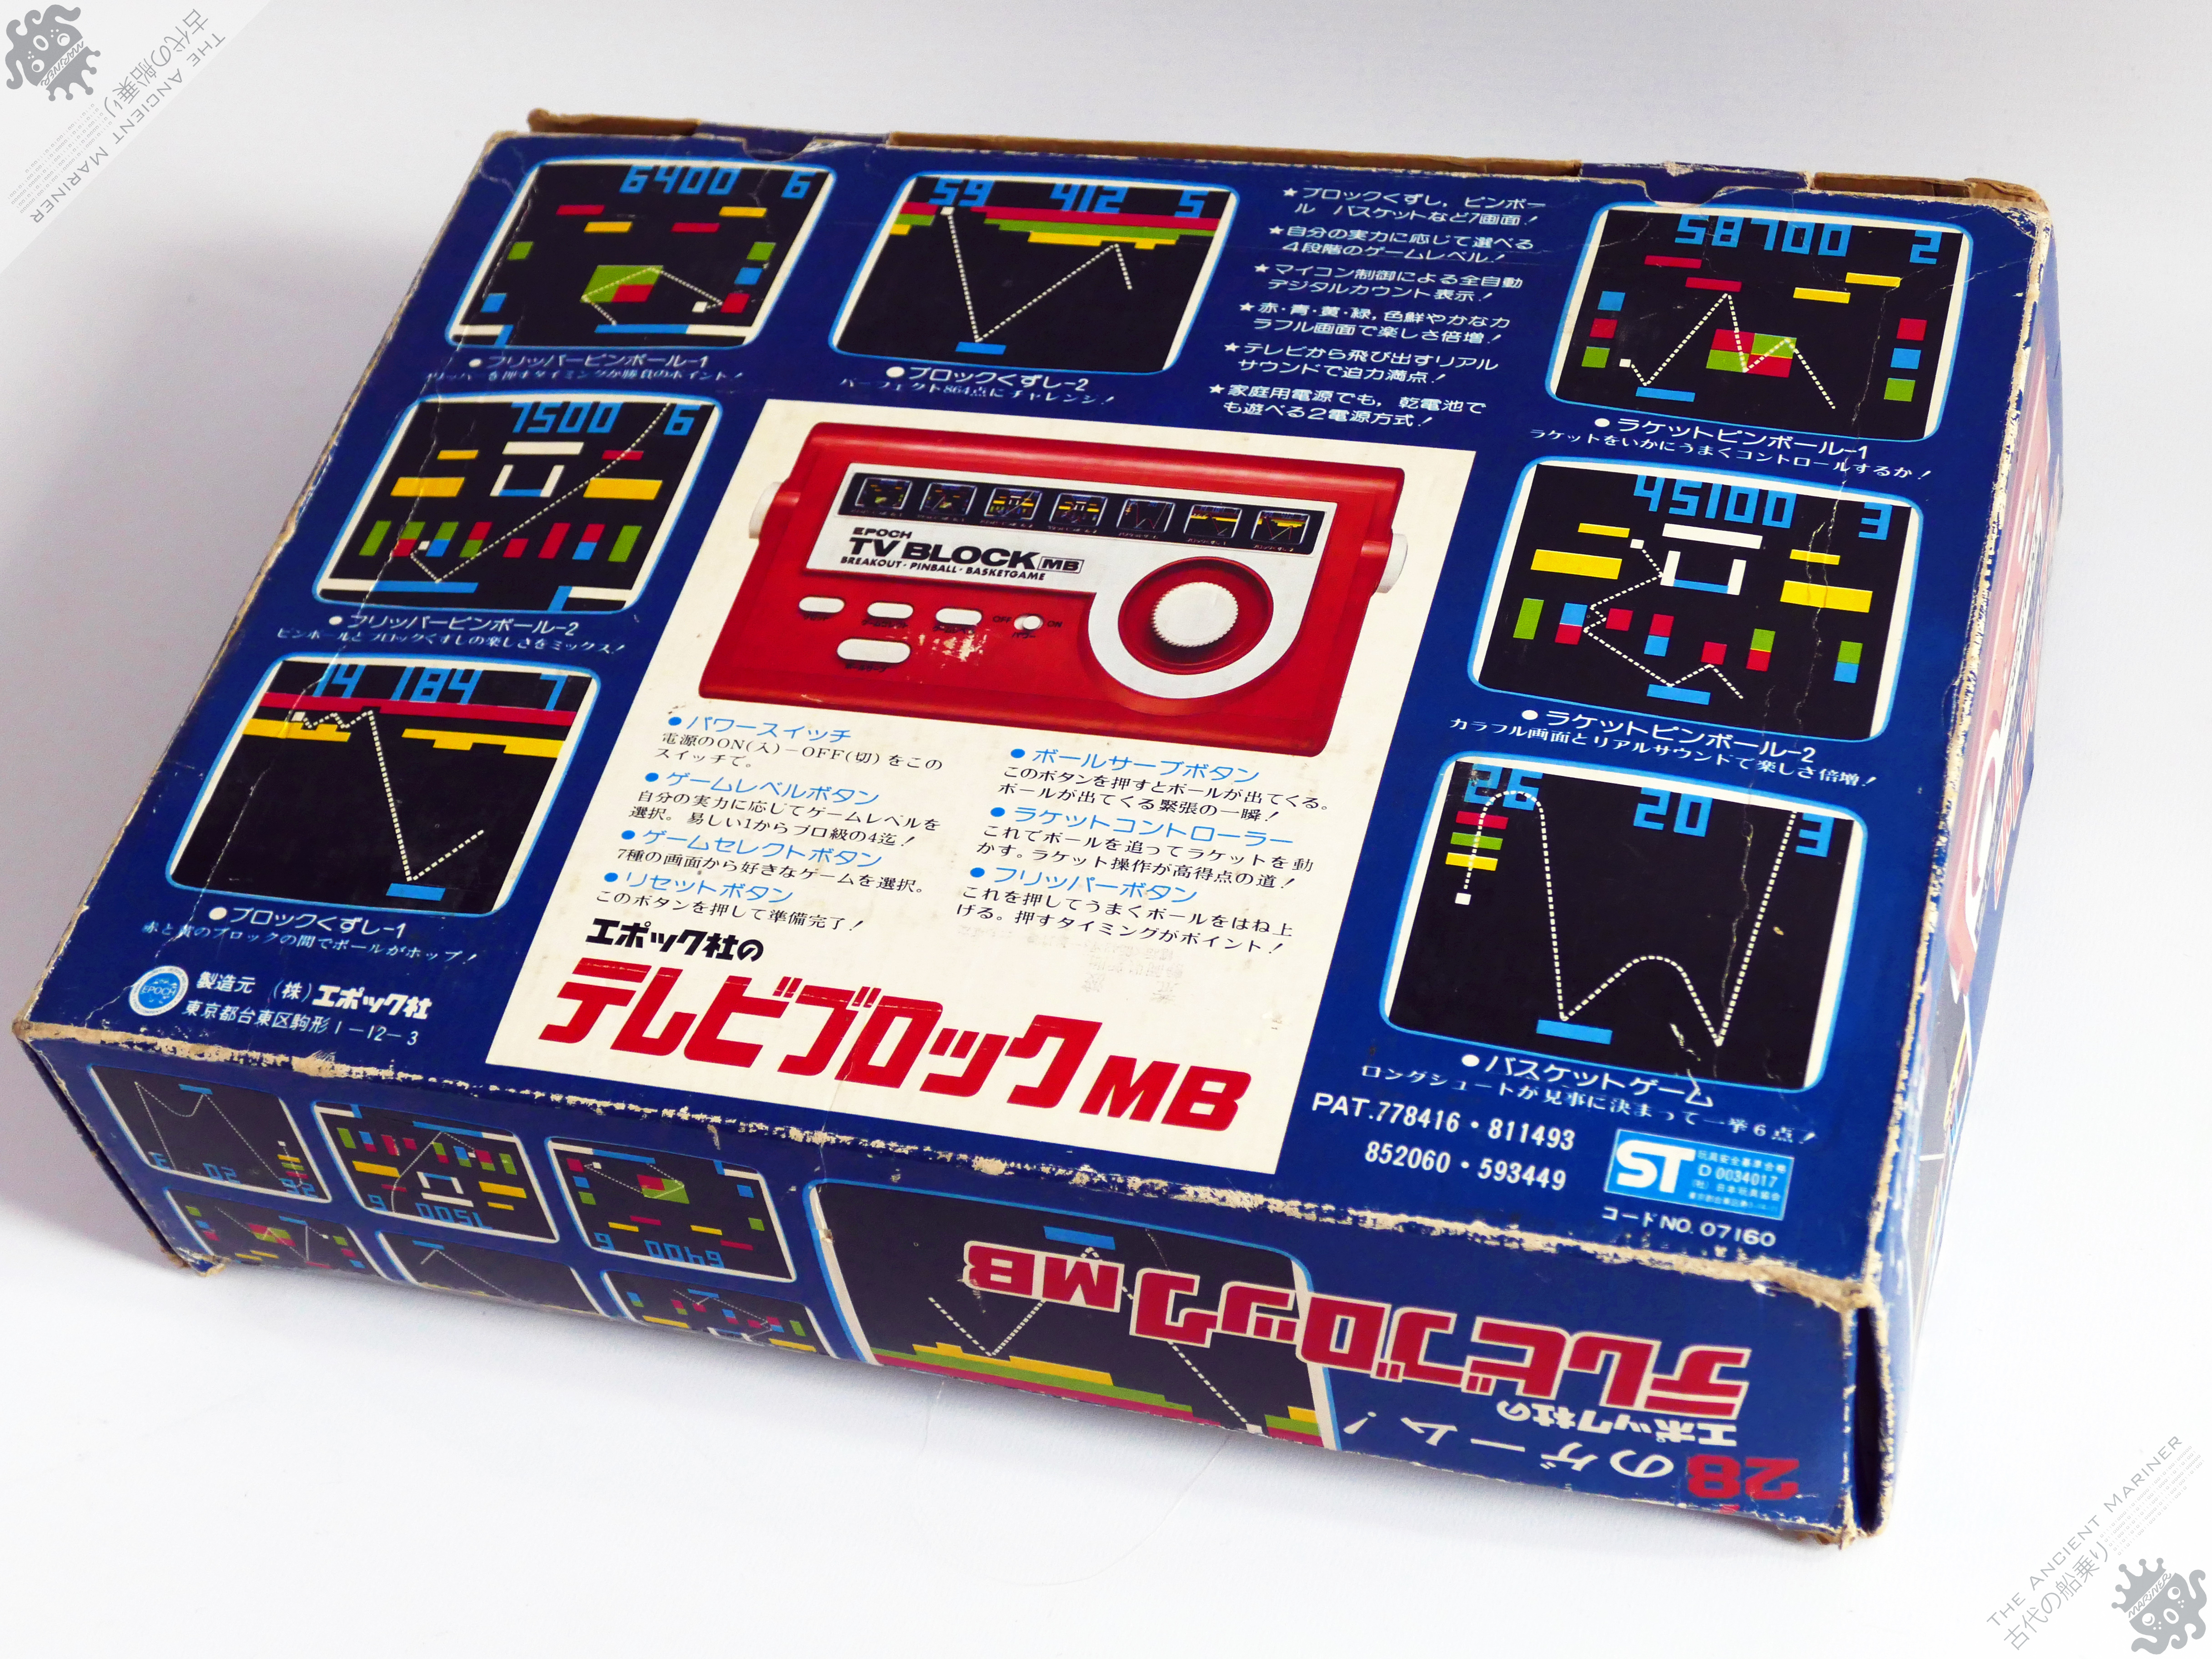 EPOCH T.V. BLOCK VINTAGE RETRO VIDEO COMPUTER GAME CONSOLE JAPAN ATARI PONG CLONE ELECTRONICS - Image 3 of 3